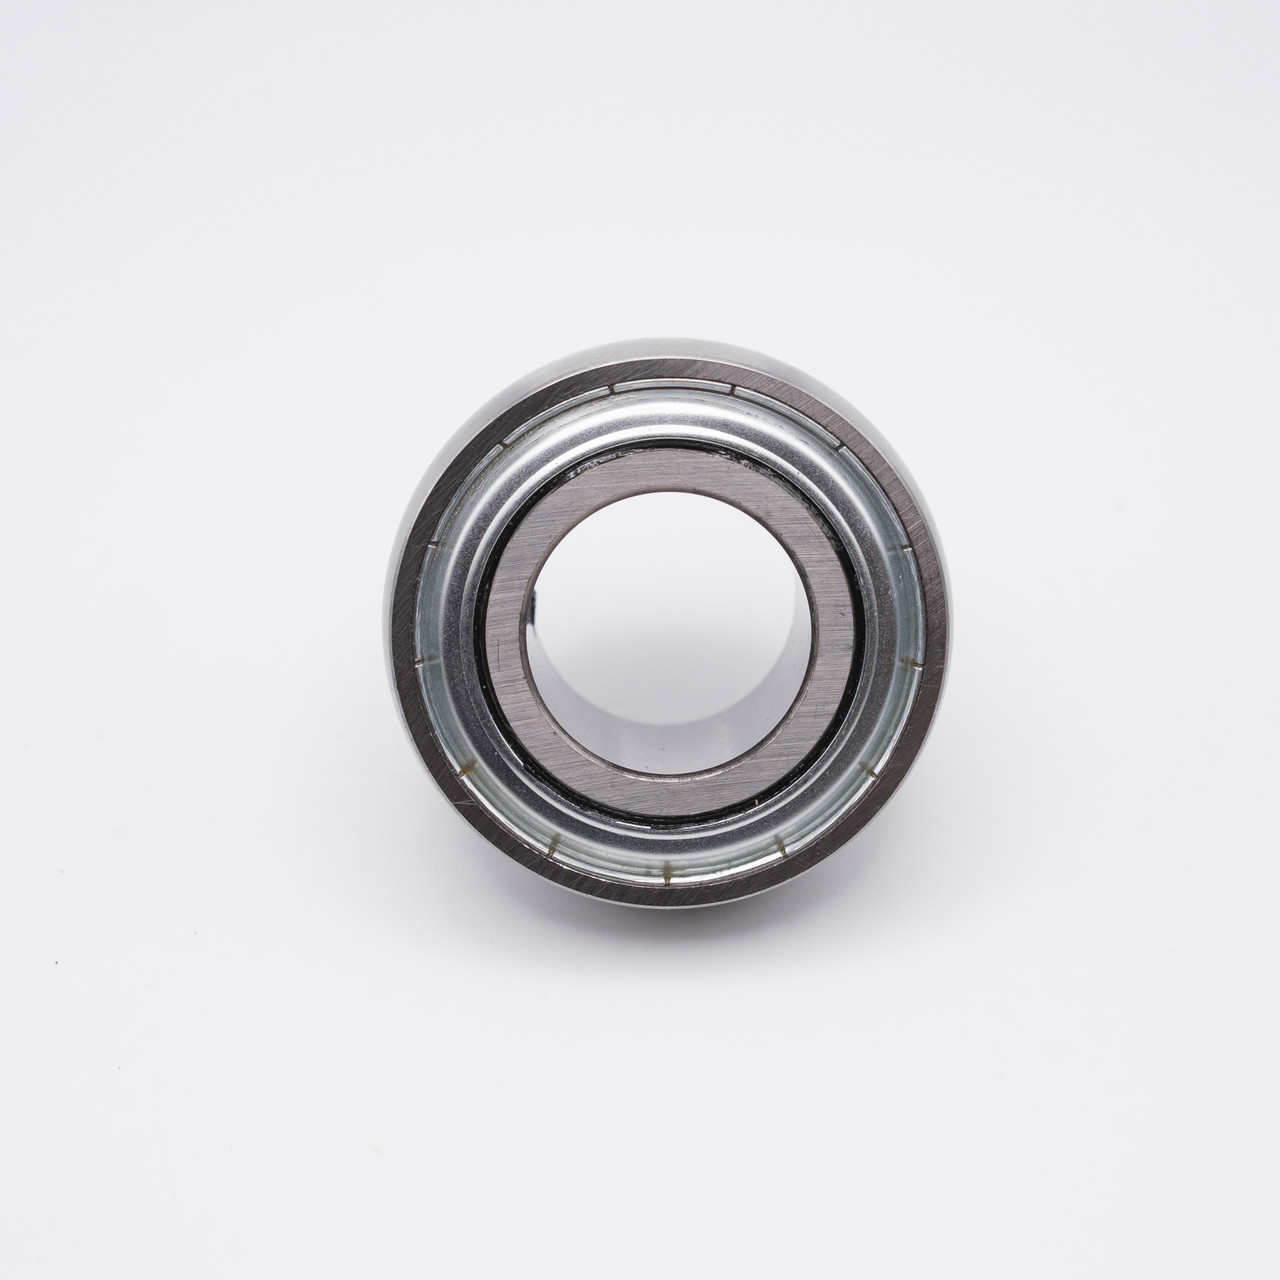 SB205 Round Outer Insert Bearing 25x52x15mm Back View